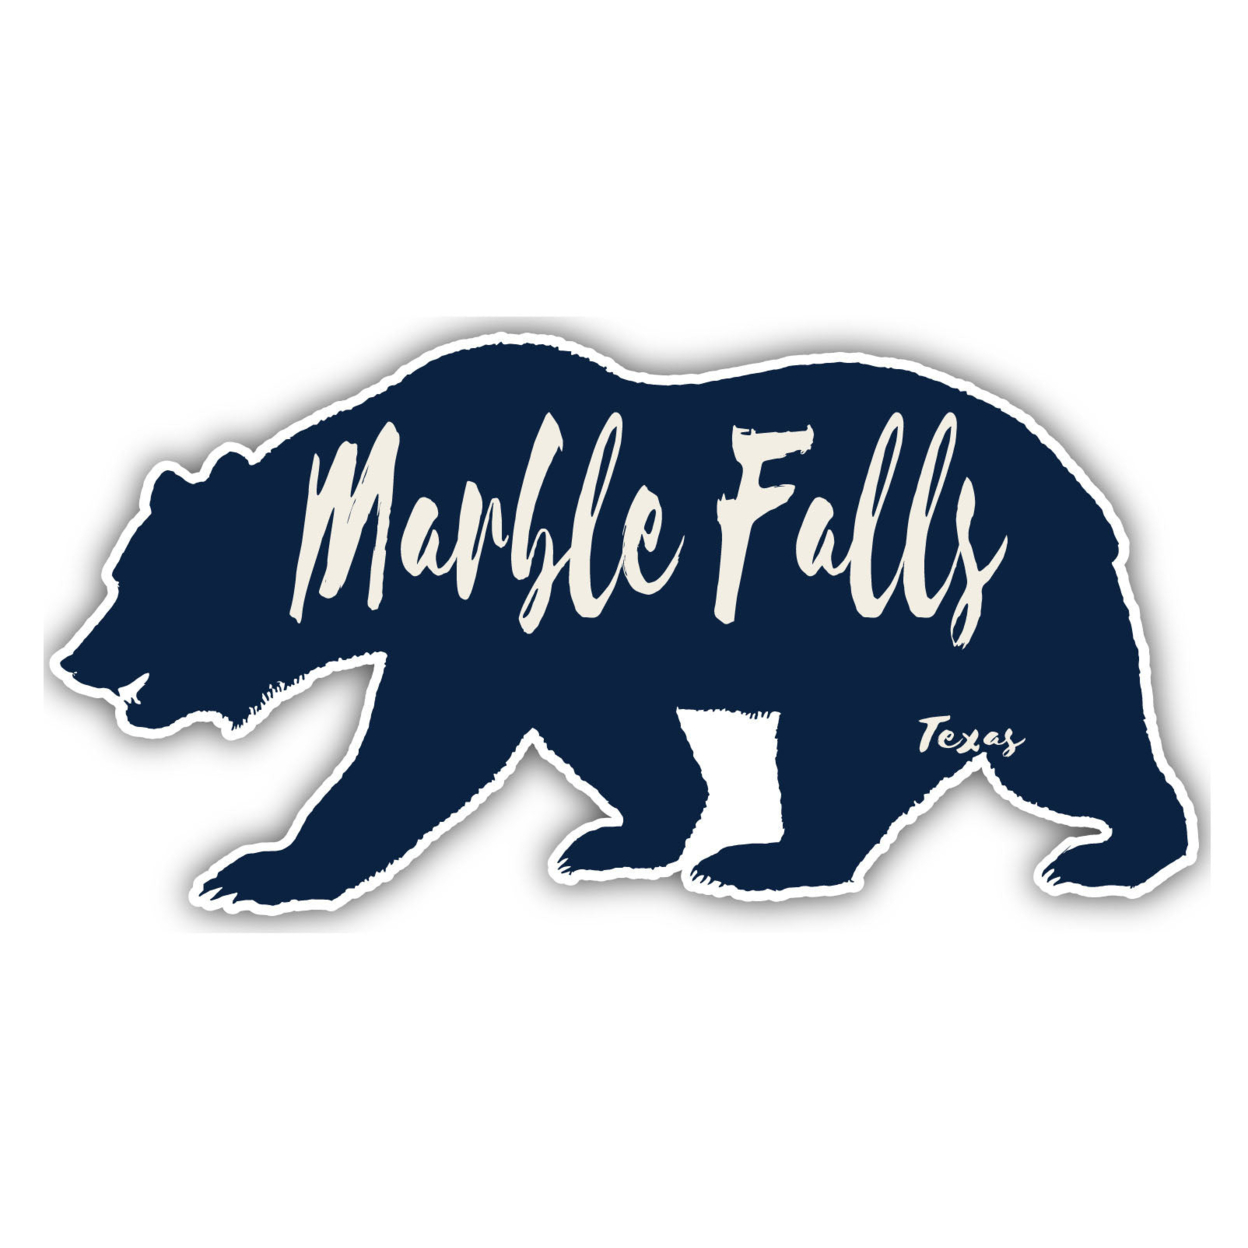 Marble Falls Texas Souvenir Decorative Stickers (Choose Theme And Size) - 4-Inch, Camp Life